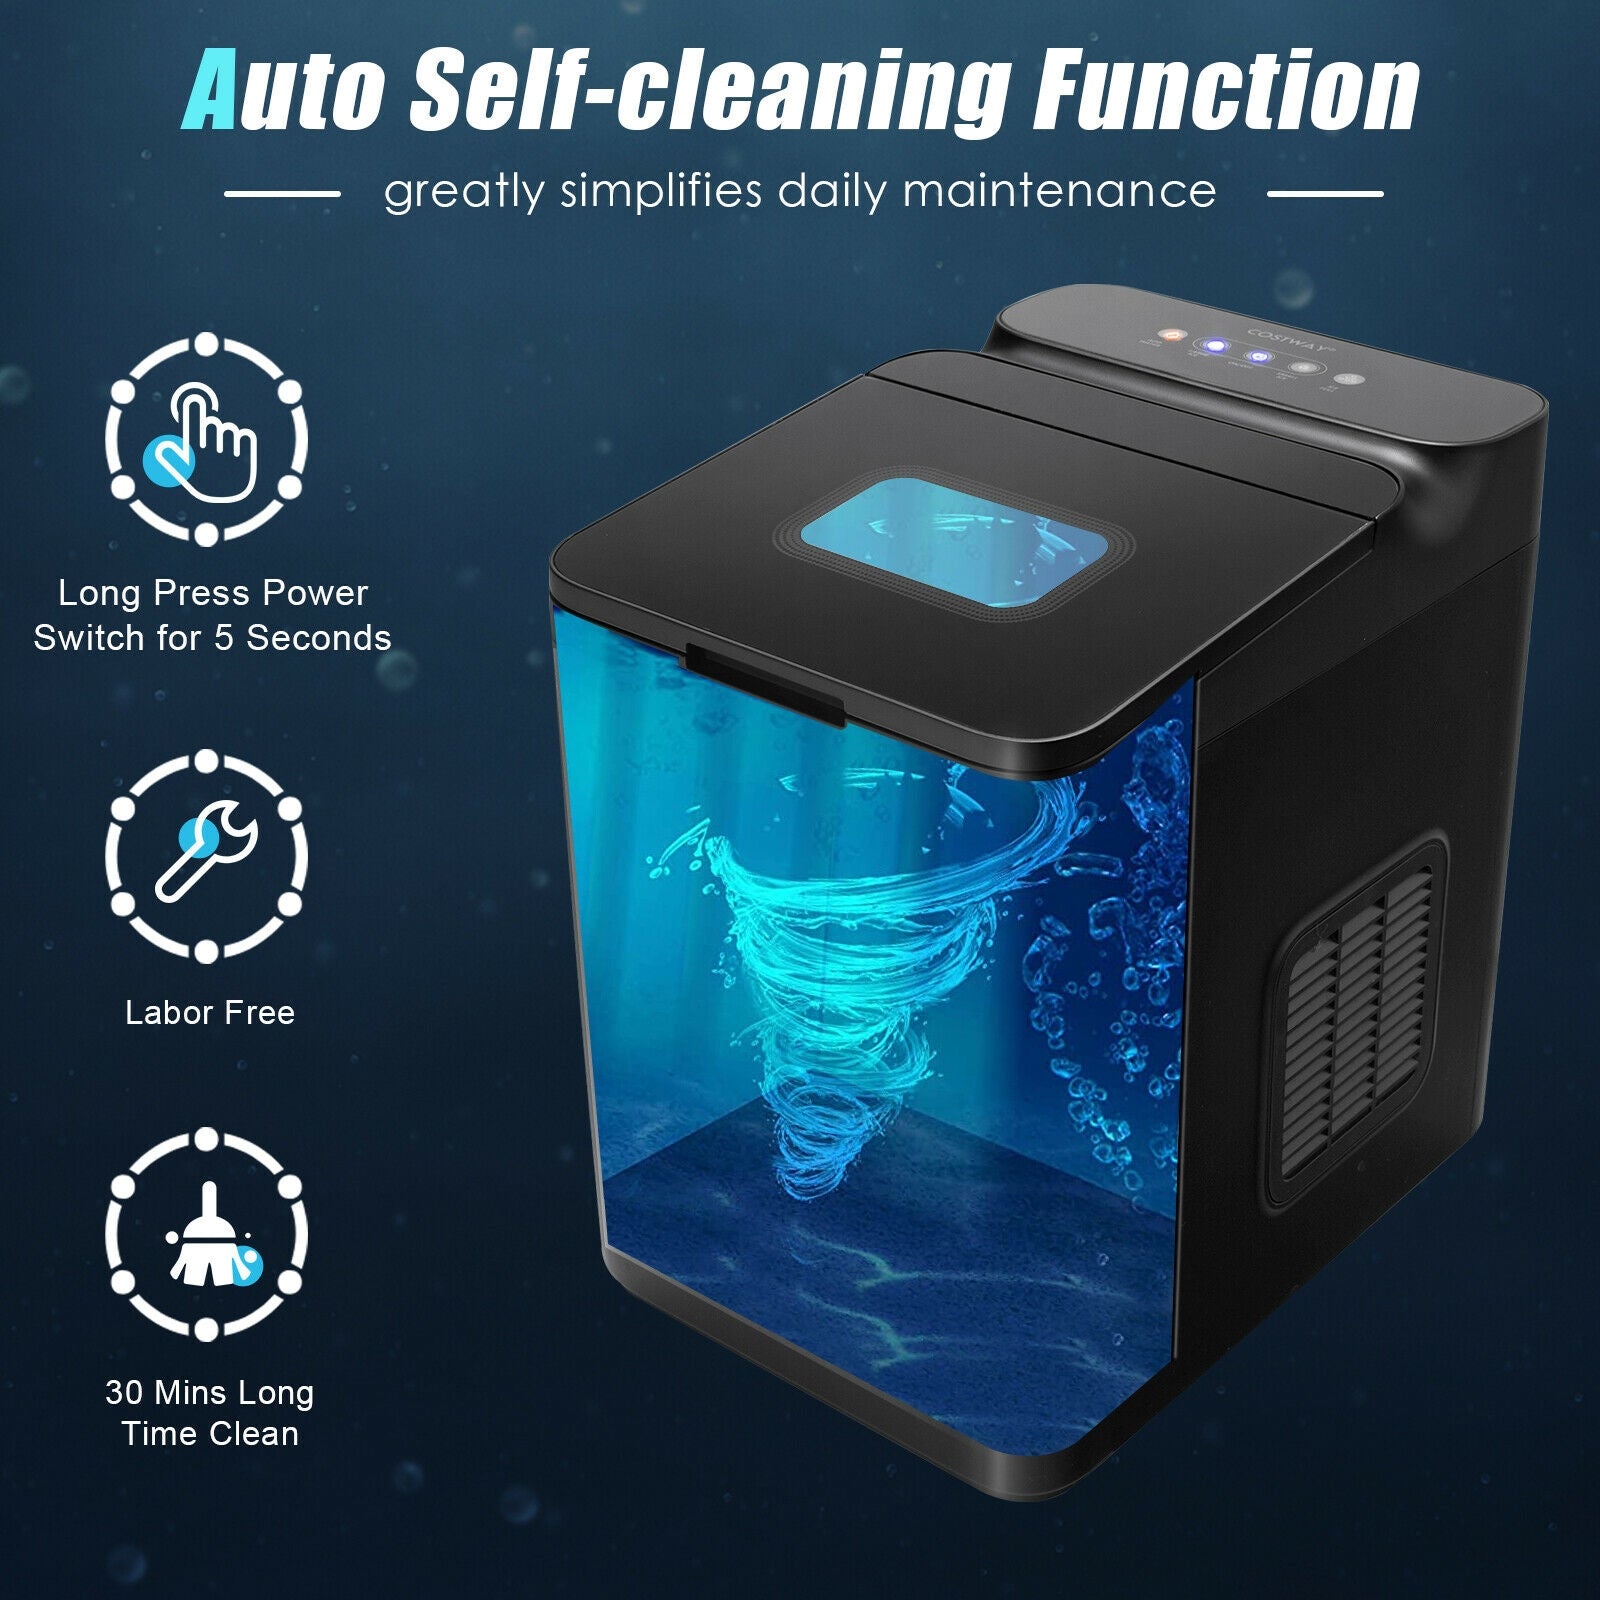 Intuitive Touch Control & Auto Cleaning: Enjoy a hassle-free ice-making experience with easy-to-follow steps: add water, set preferences, and wait for the ice. The sleek touch control panel looks sophisticated and user-friendly. Activate the 30-minute auto clean mode with a simple 5-second press of the power switch, simplifying daily maintenance.